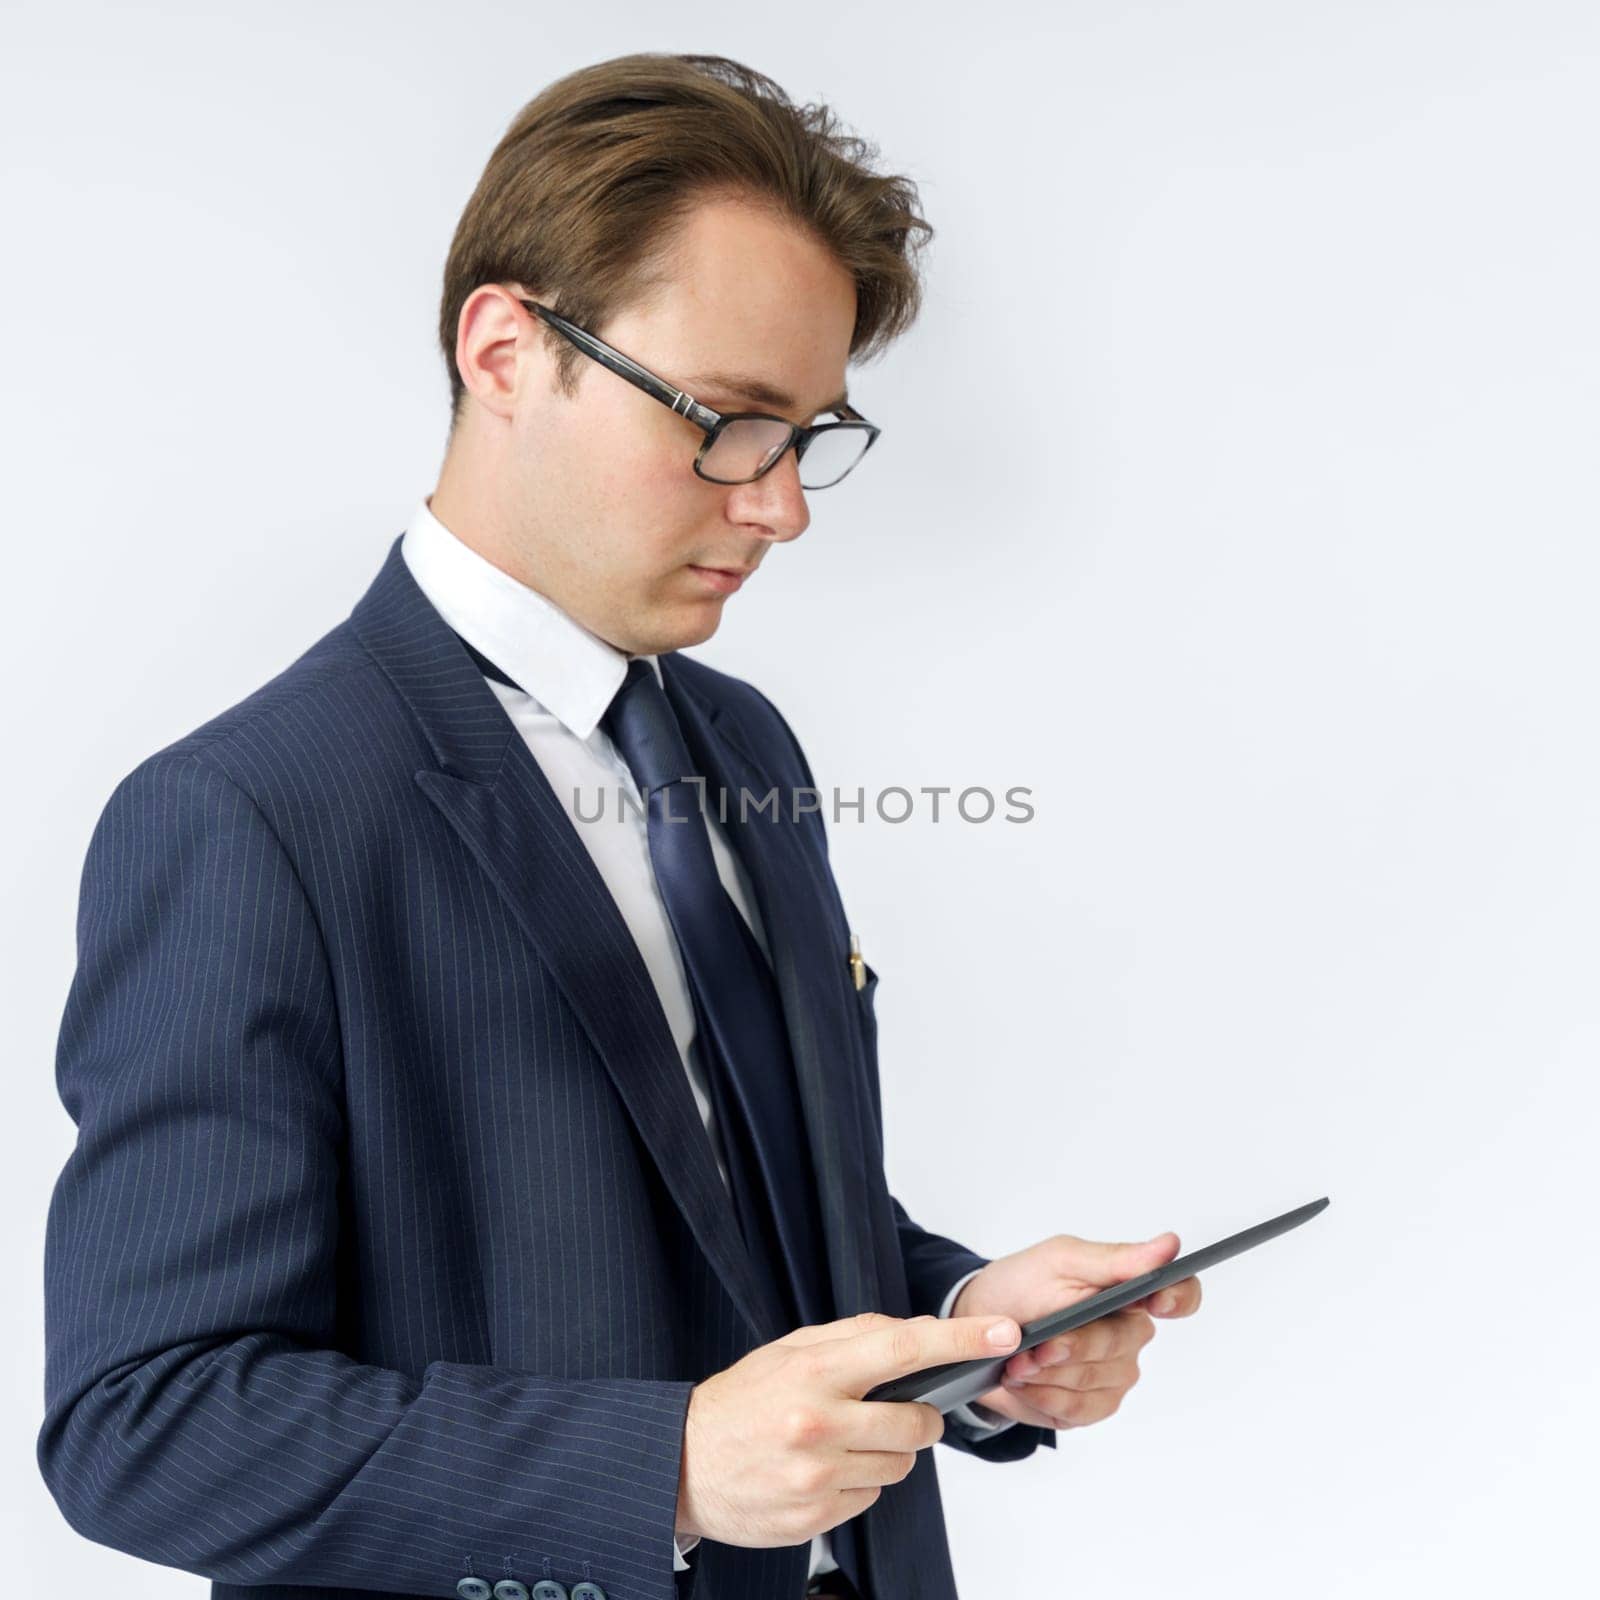 Portrait of a businessman in a blue suit holding an electronic tablet in his hands. White background. Business and finance concept